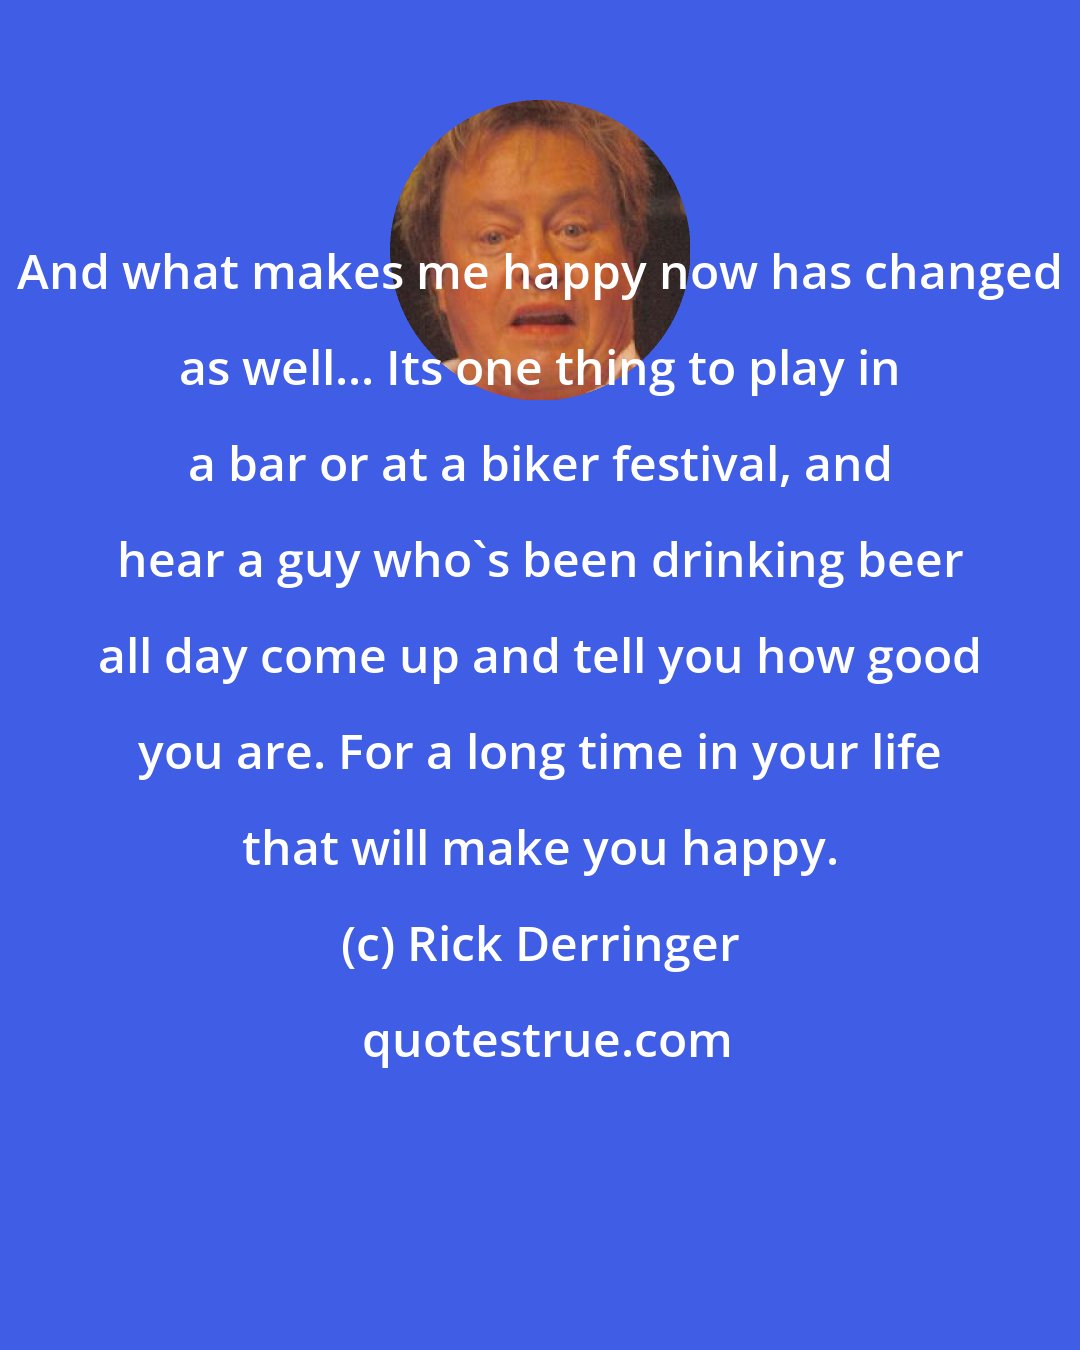 Rick Derringer: And what makes me happy now has changed as well... Its one thing to play in a bar or at a biker festival, and hear a guy who's been drinking beer all day come up and tell you how good you are. For a long time in your life that will make you happy.